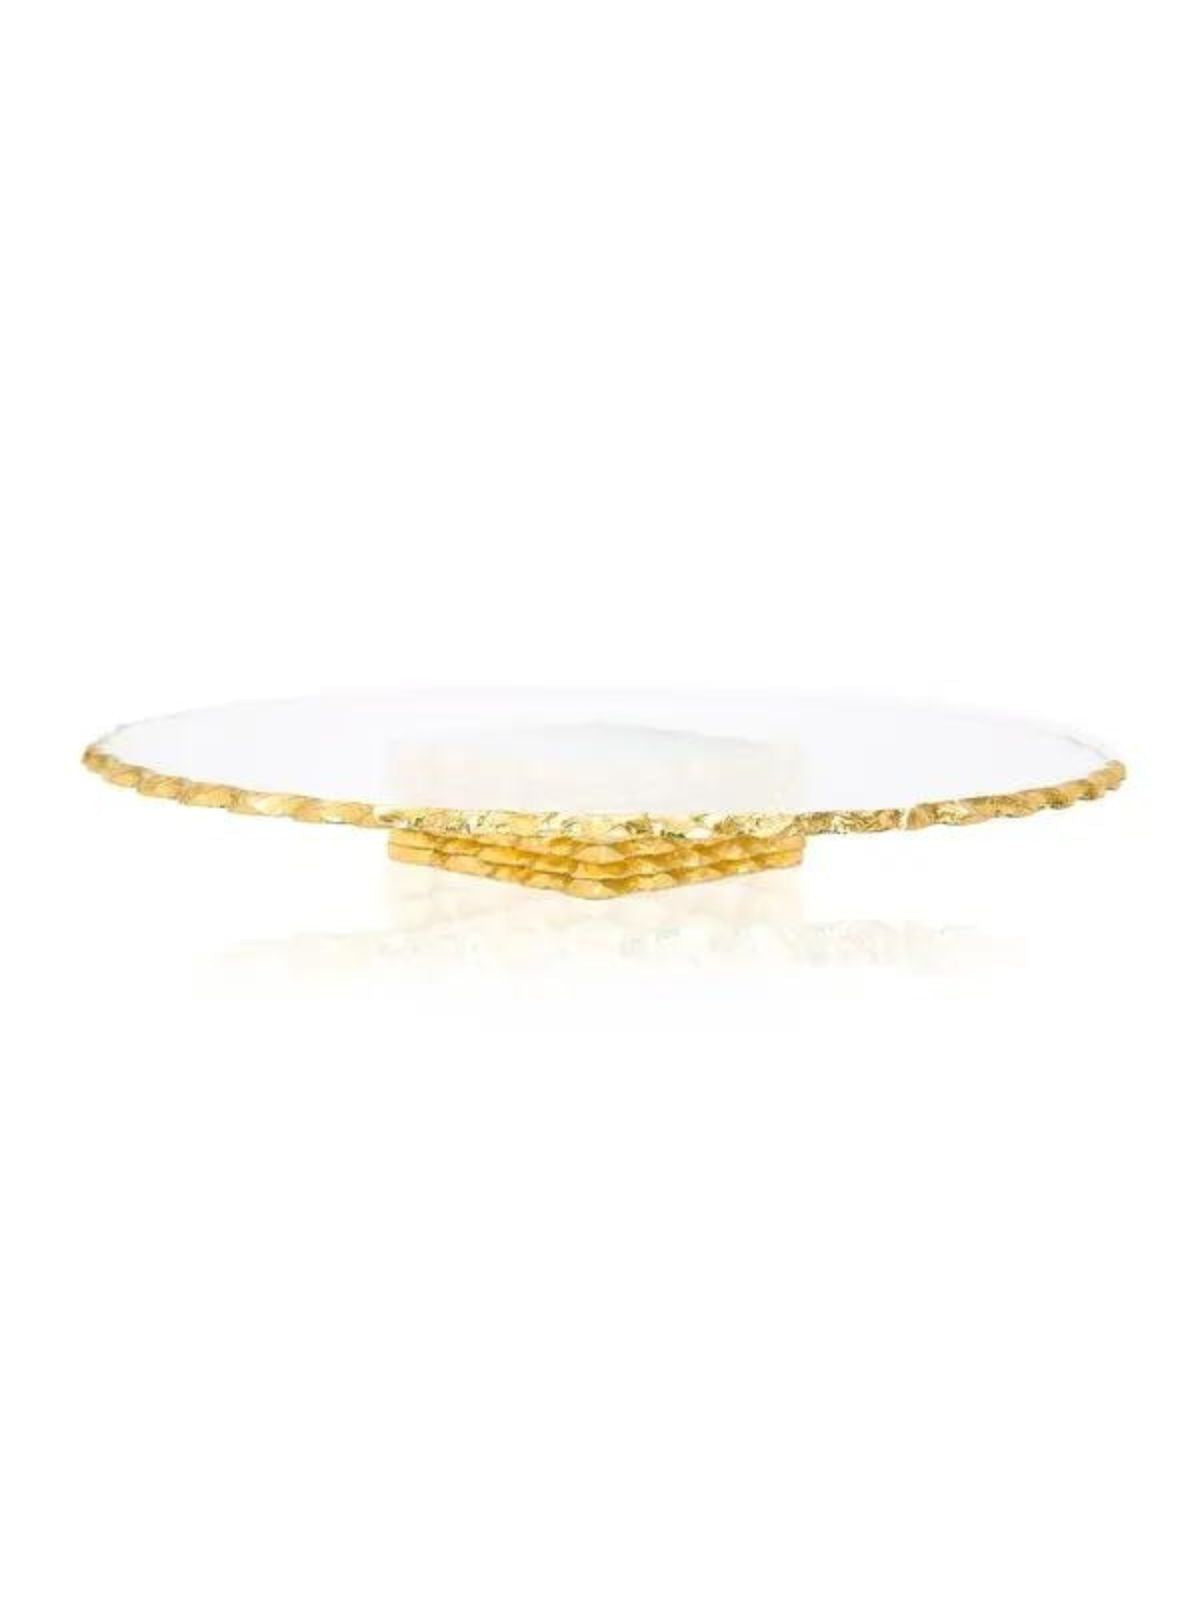 12D Stacked Glass Cake Stand With Luxurious Gold Edges sold by KYA Home Decor.